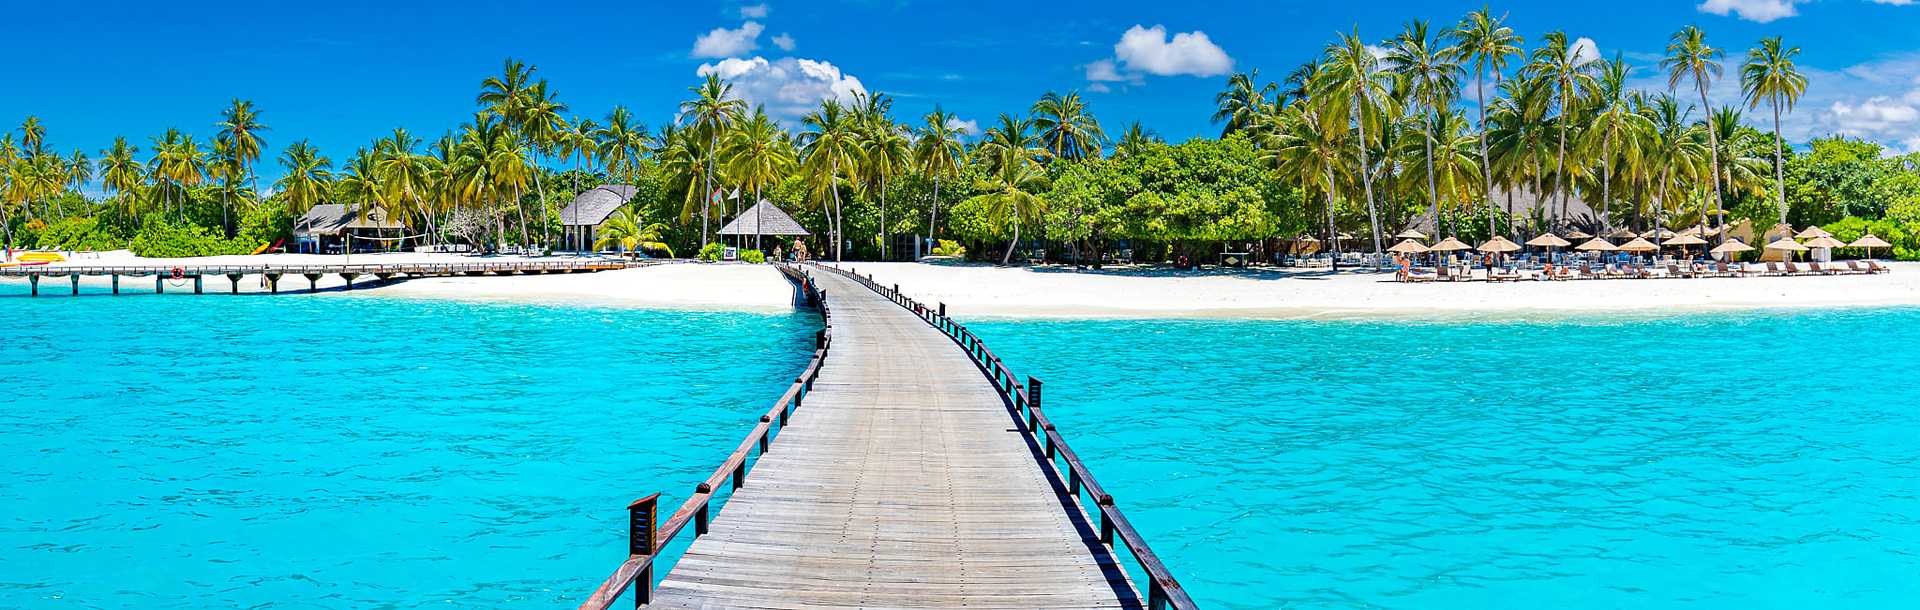 Walkway over the water in the Maldives.